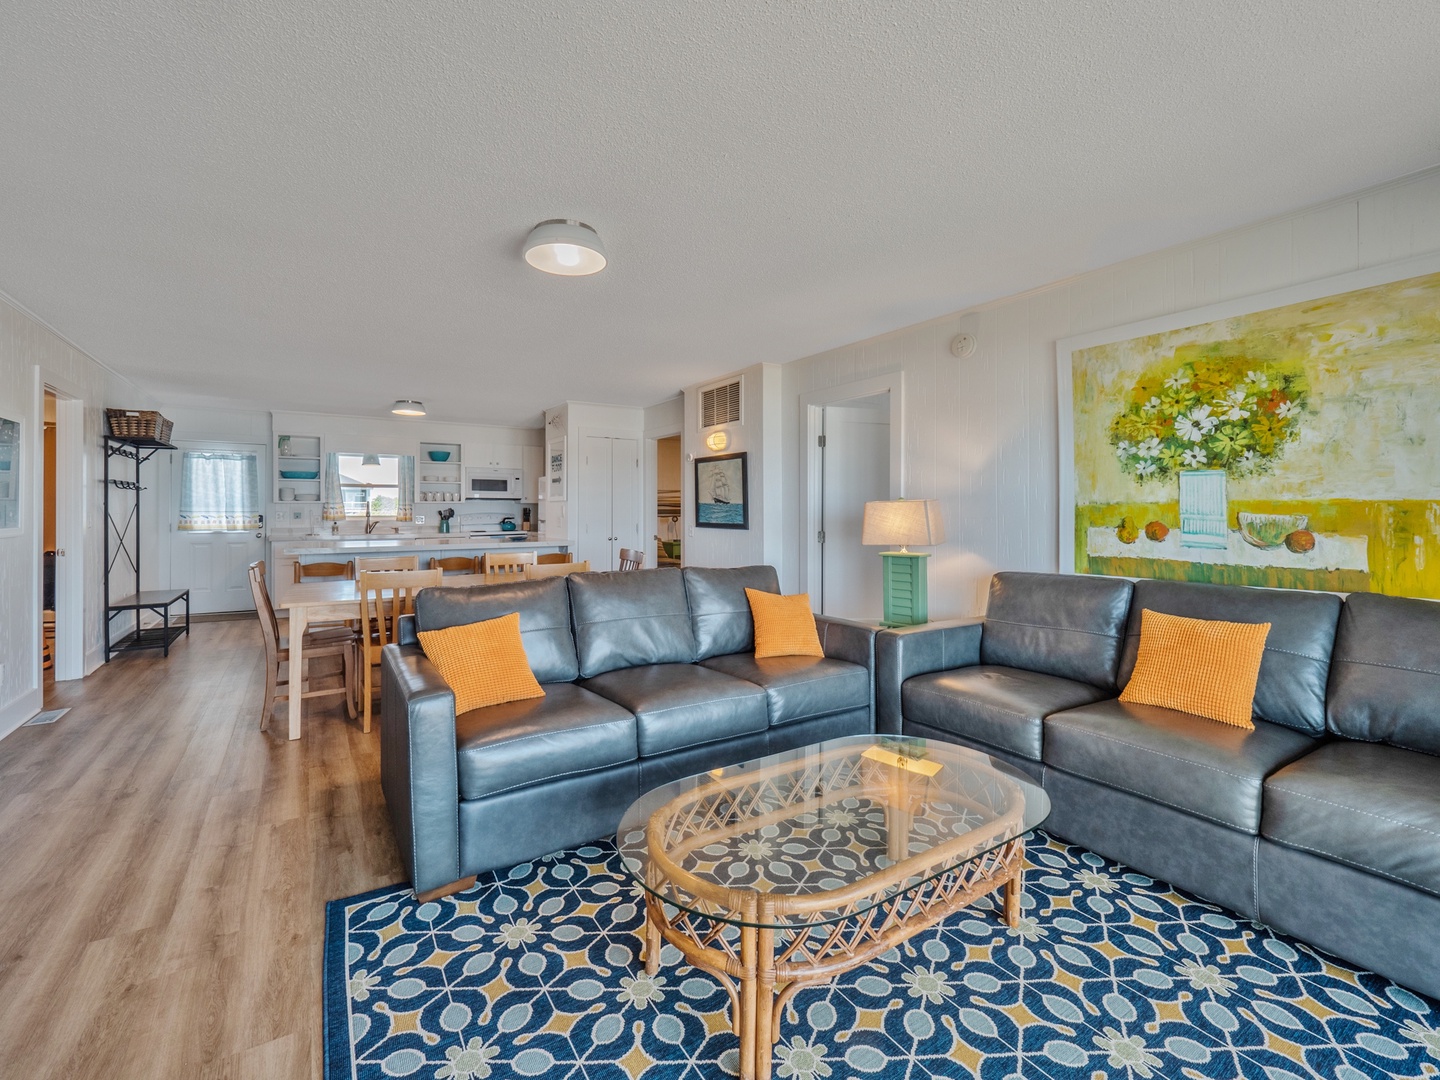 First Level - The open living area with an oceanfront balcony and Smart TV